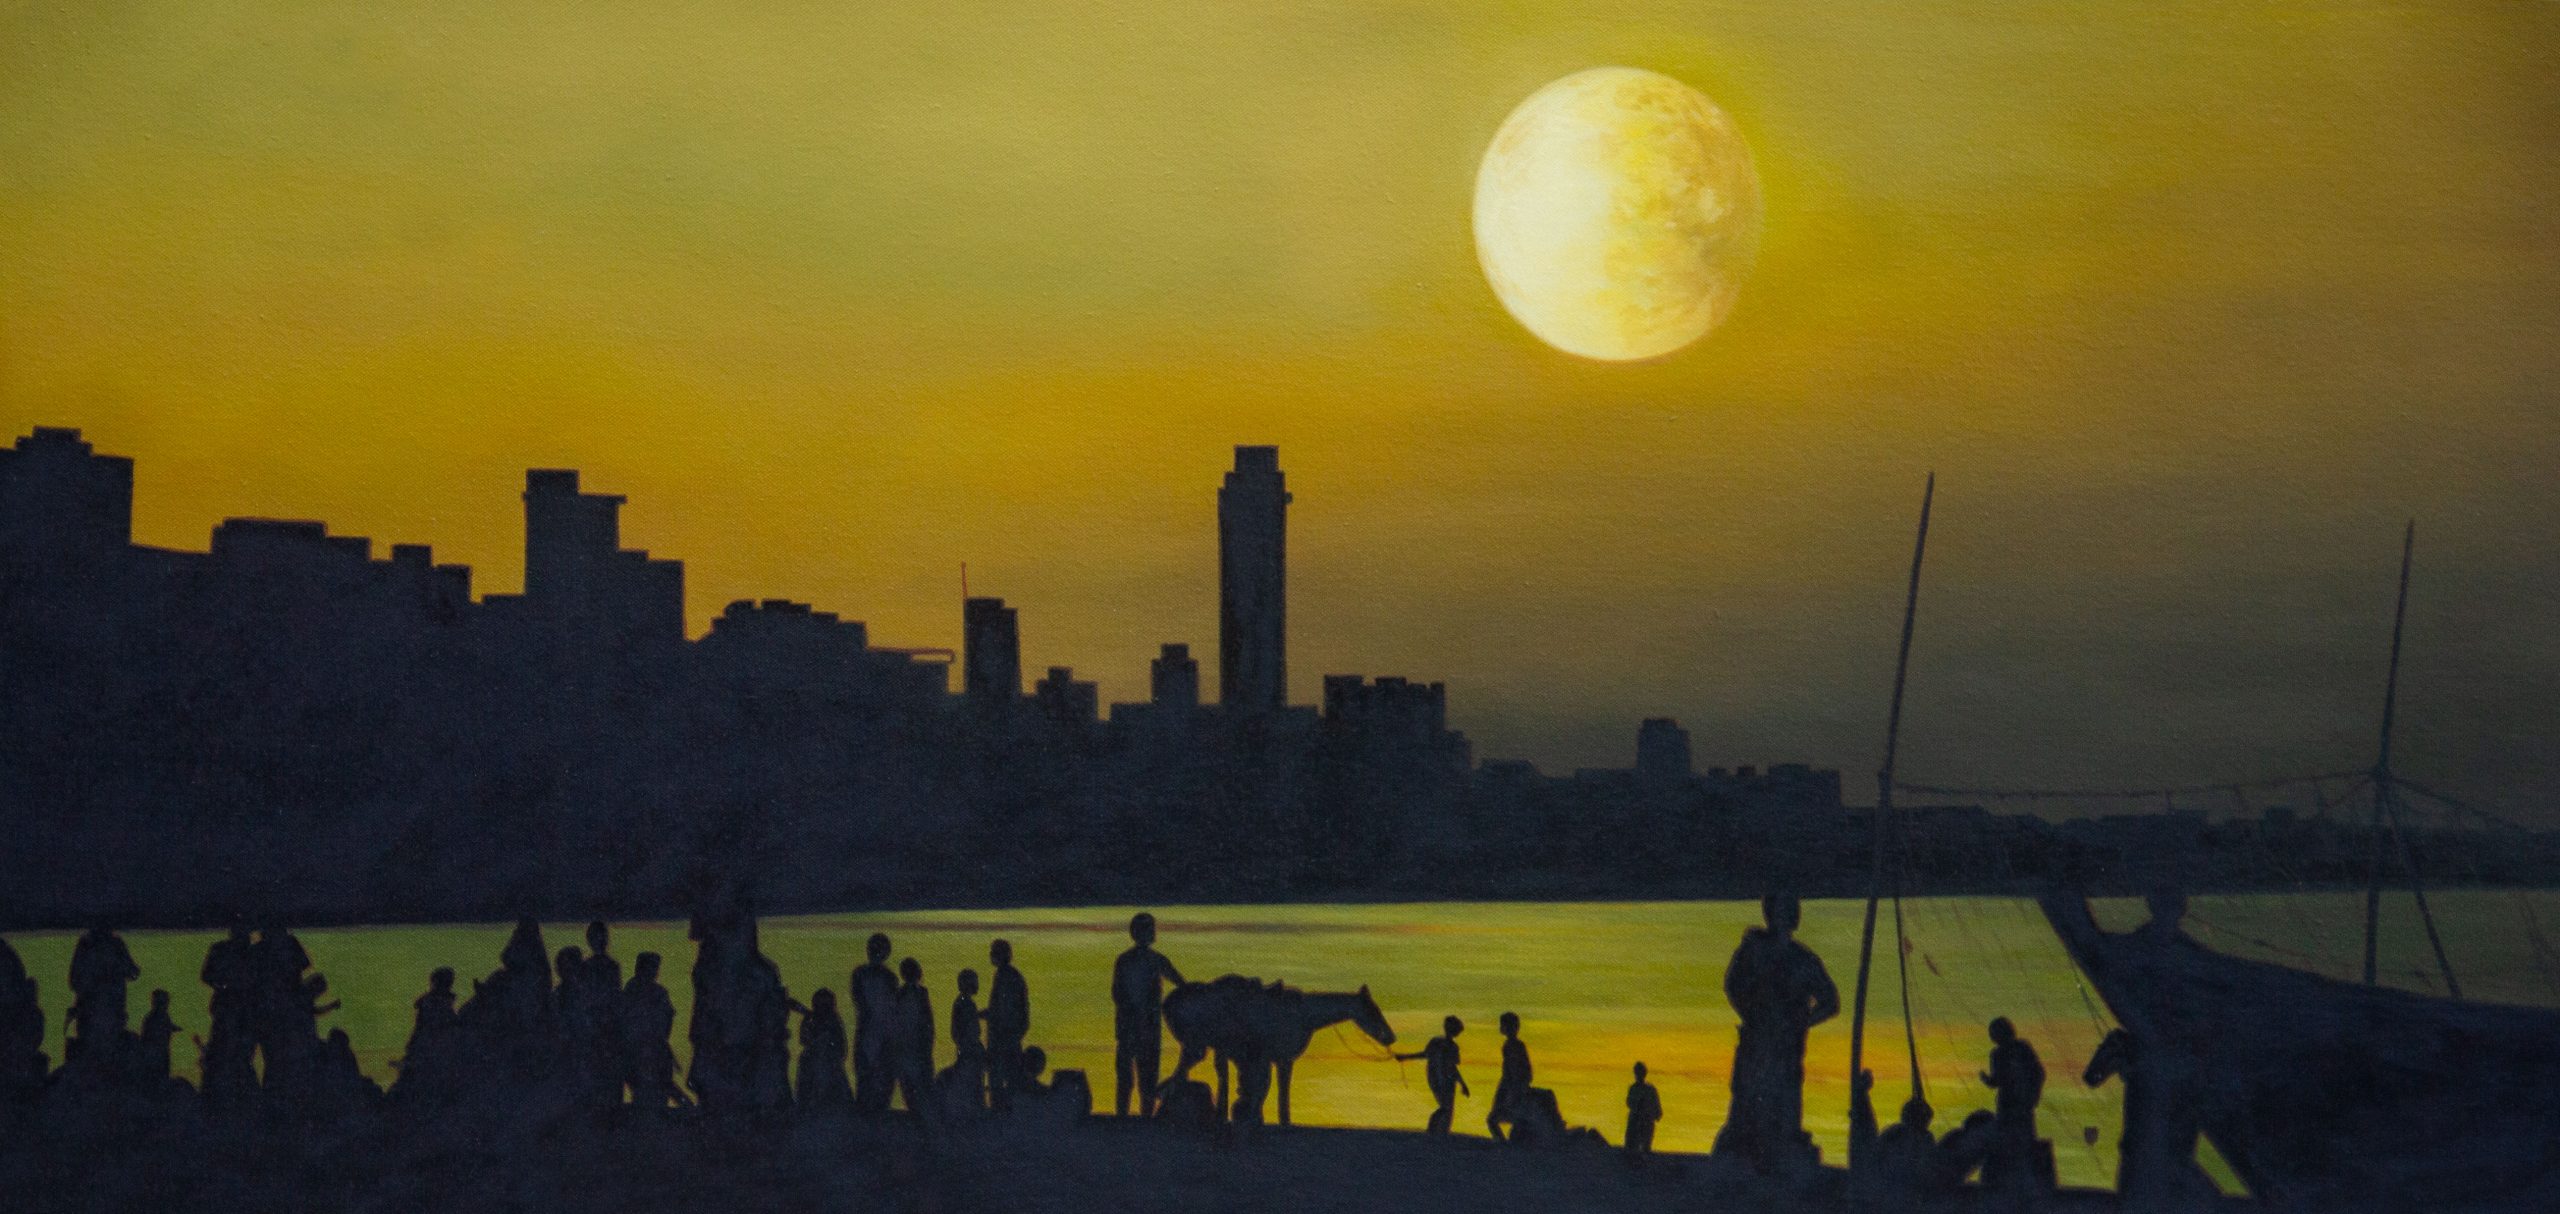 Meetings - Chapati Beach. Oil Painting 2019, Christian Staebler, LoveArtPassion. Chapati Beach Mumbai, India. Shadow silhouettes of people, animals, and skyscrapers.